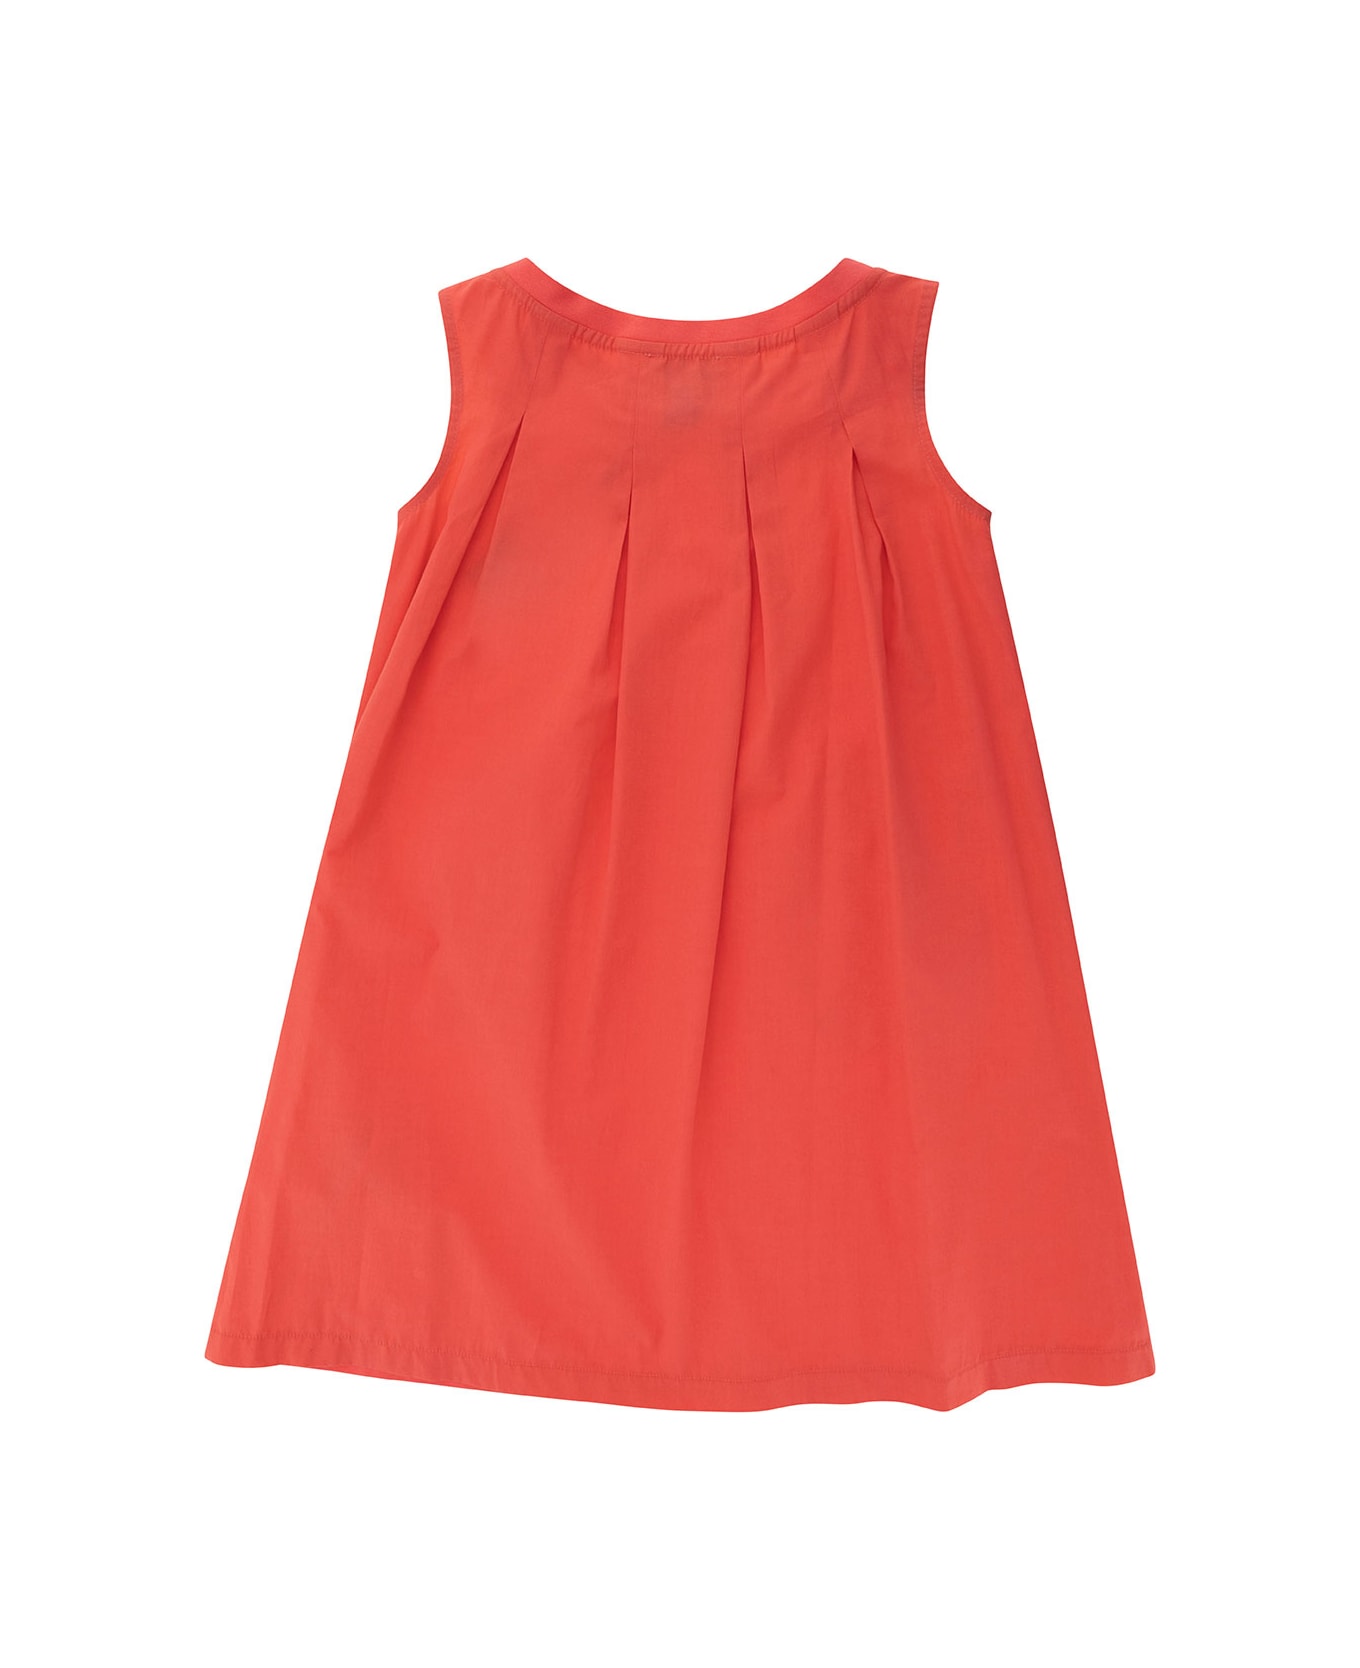 Emporio Armani Orange Dress With Pockets And Embroidered Logo In Cotton Girl - Fuxia